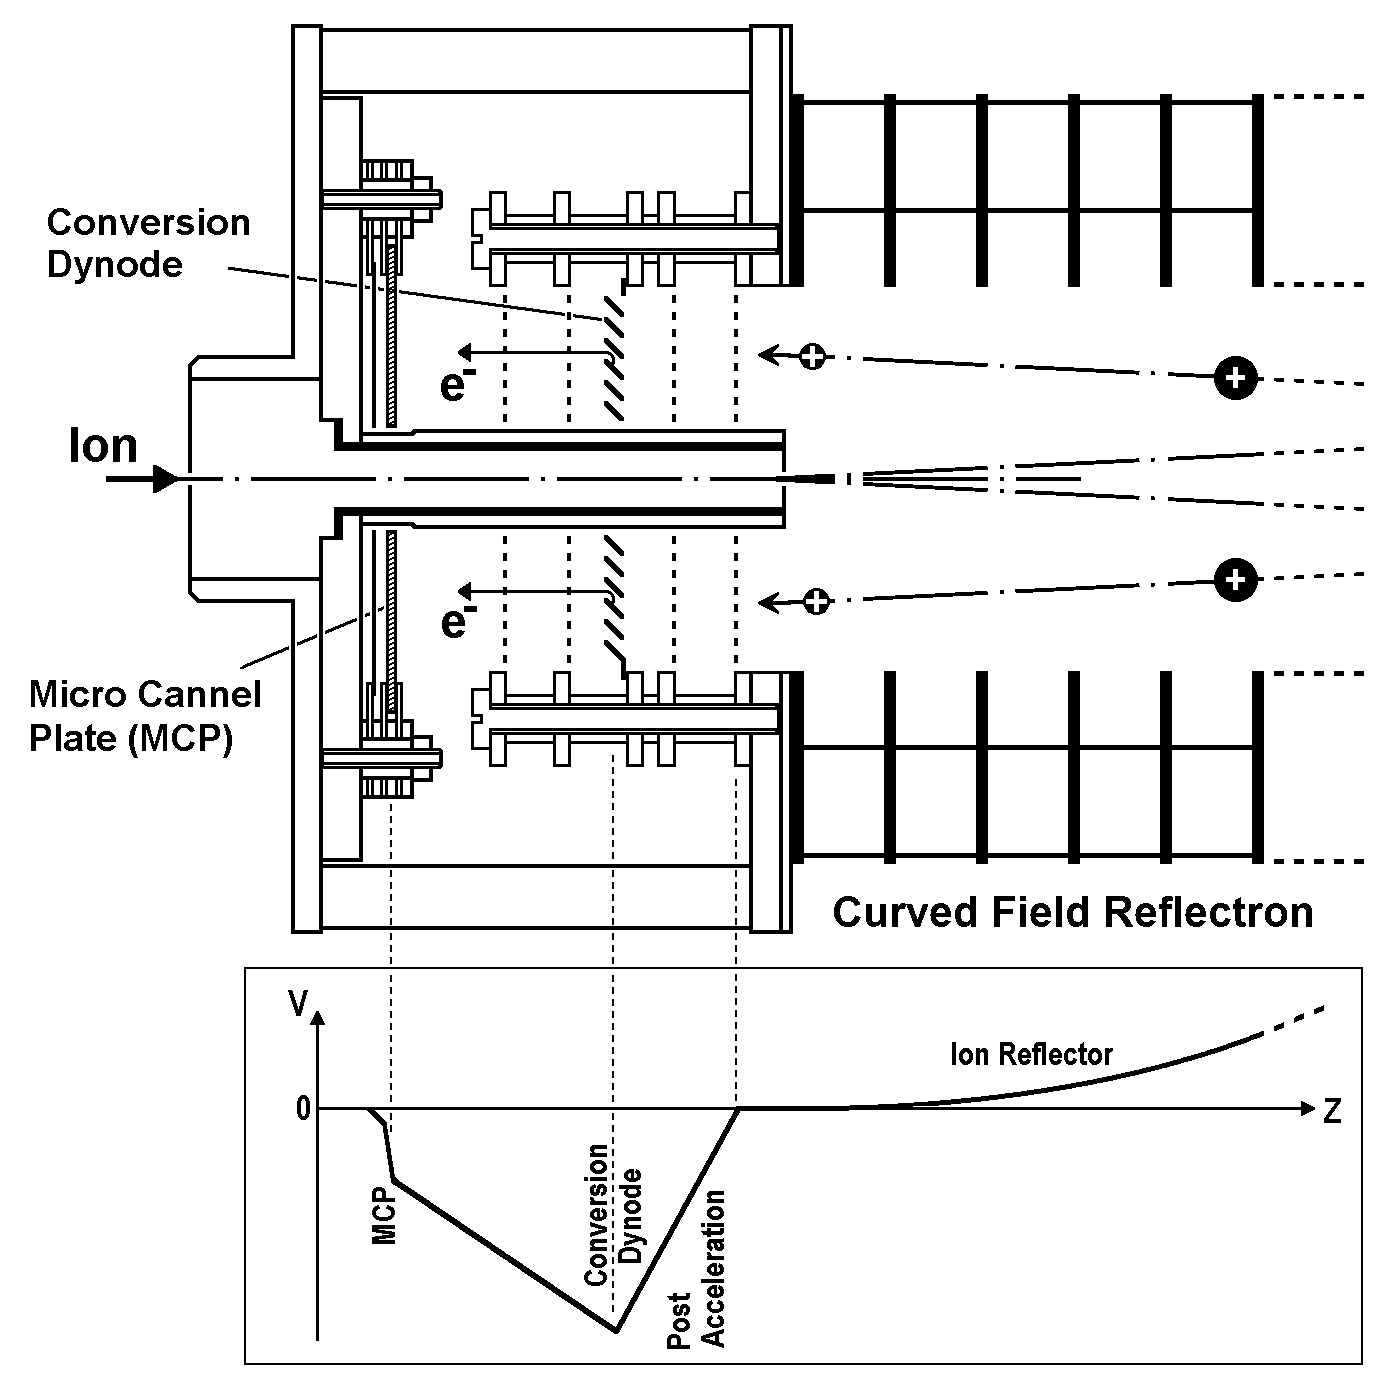 Cross-sectional diagram of the Post-Acceleration Detector for the Reflectron used in LAMS-50K (revised from the original 1988 version)